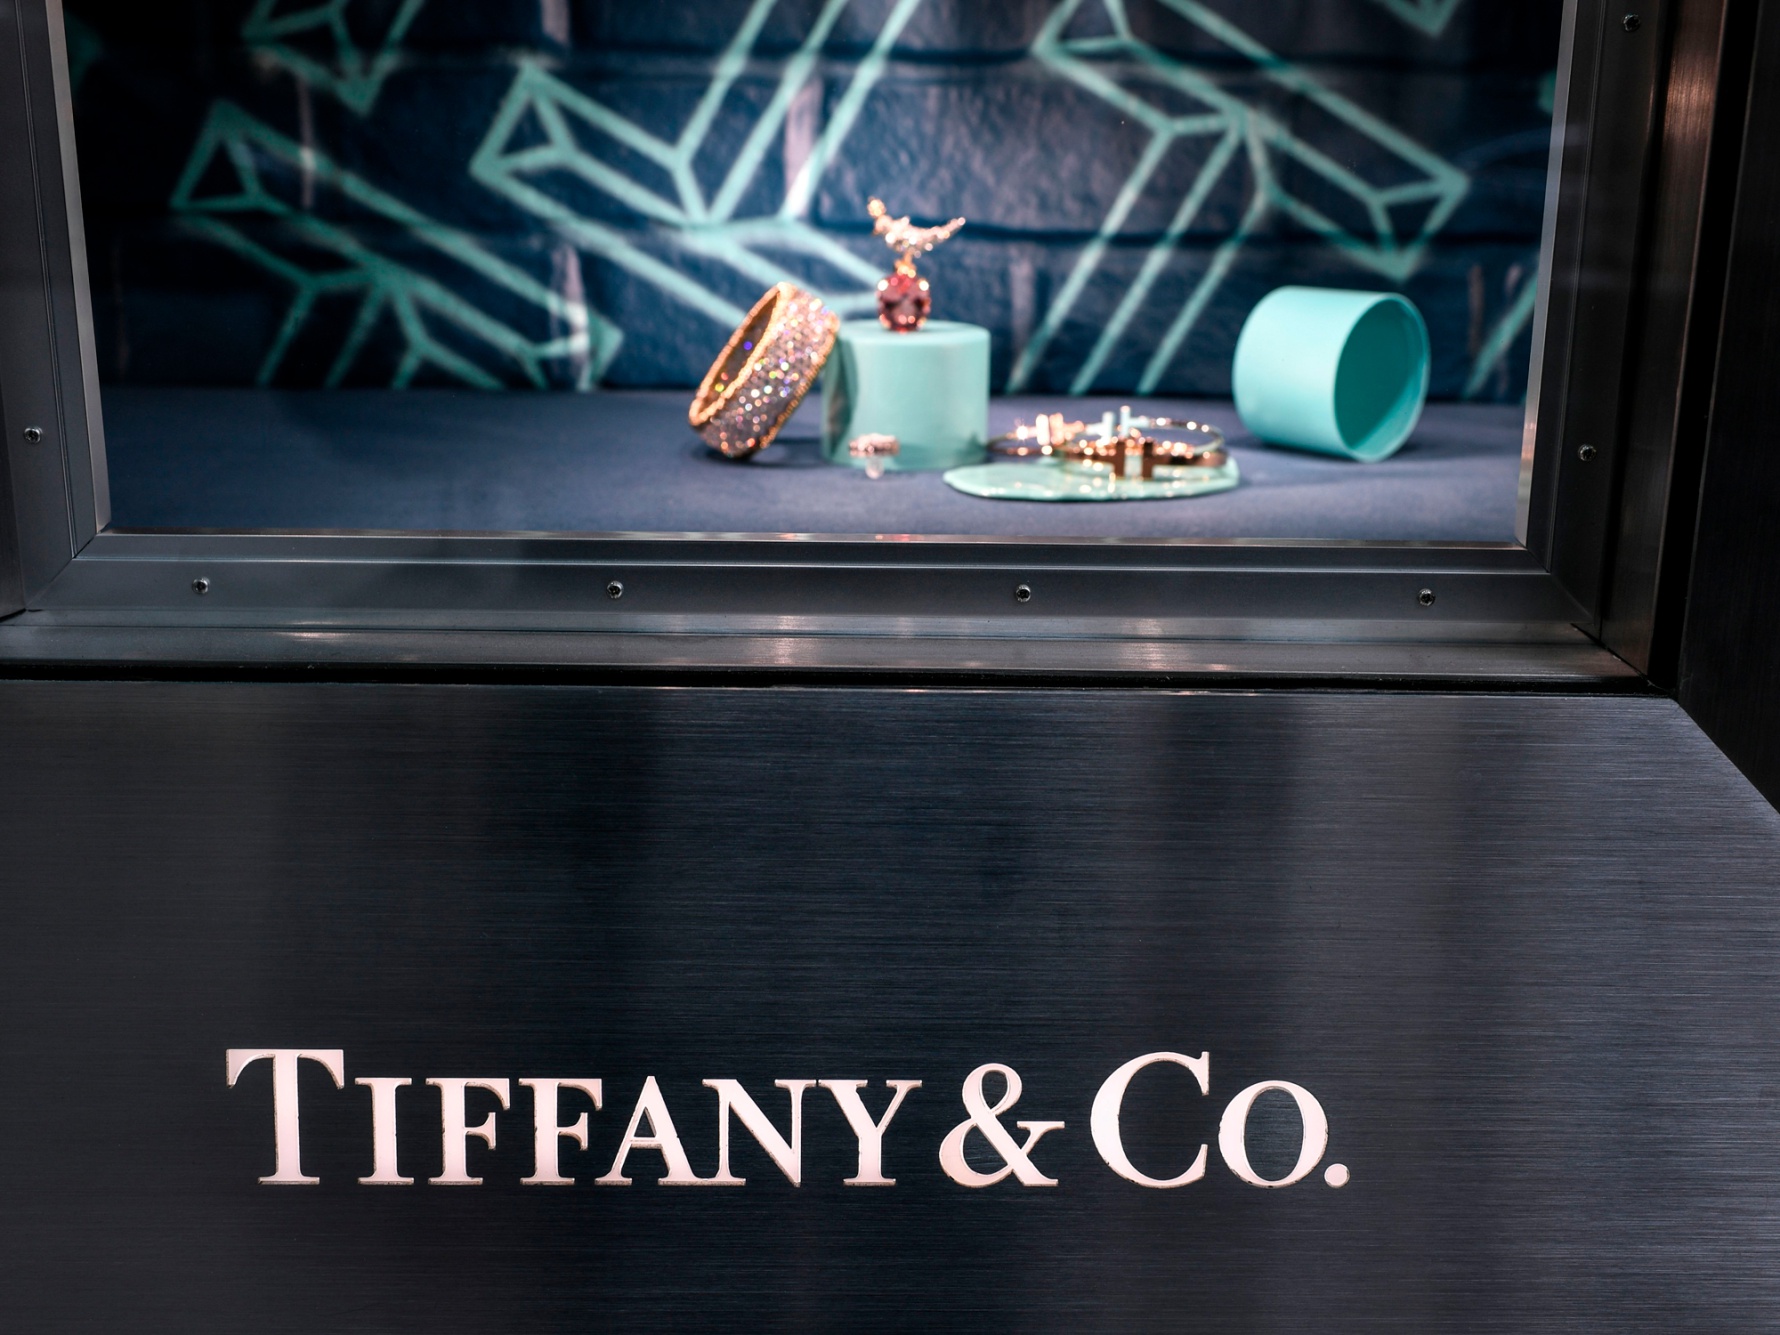 LVMH's purchase of Tiffany puts pressure on jewelry rival